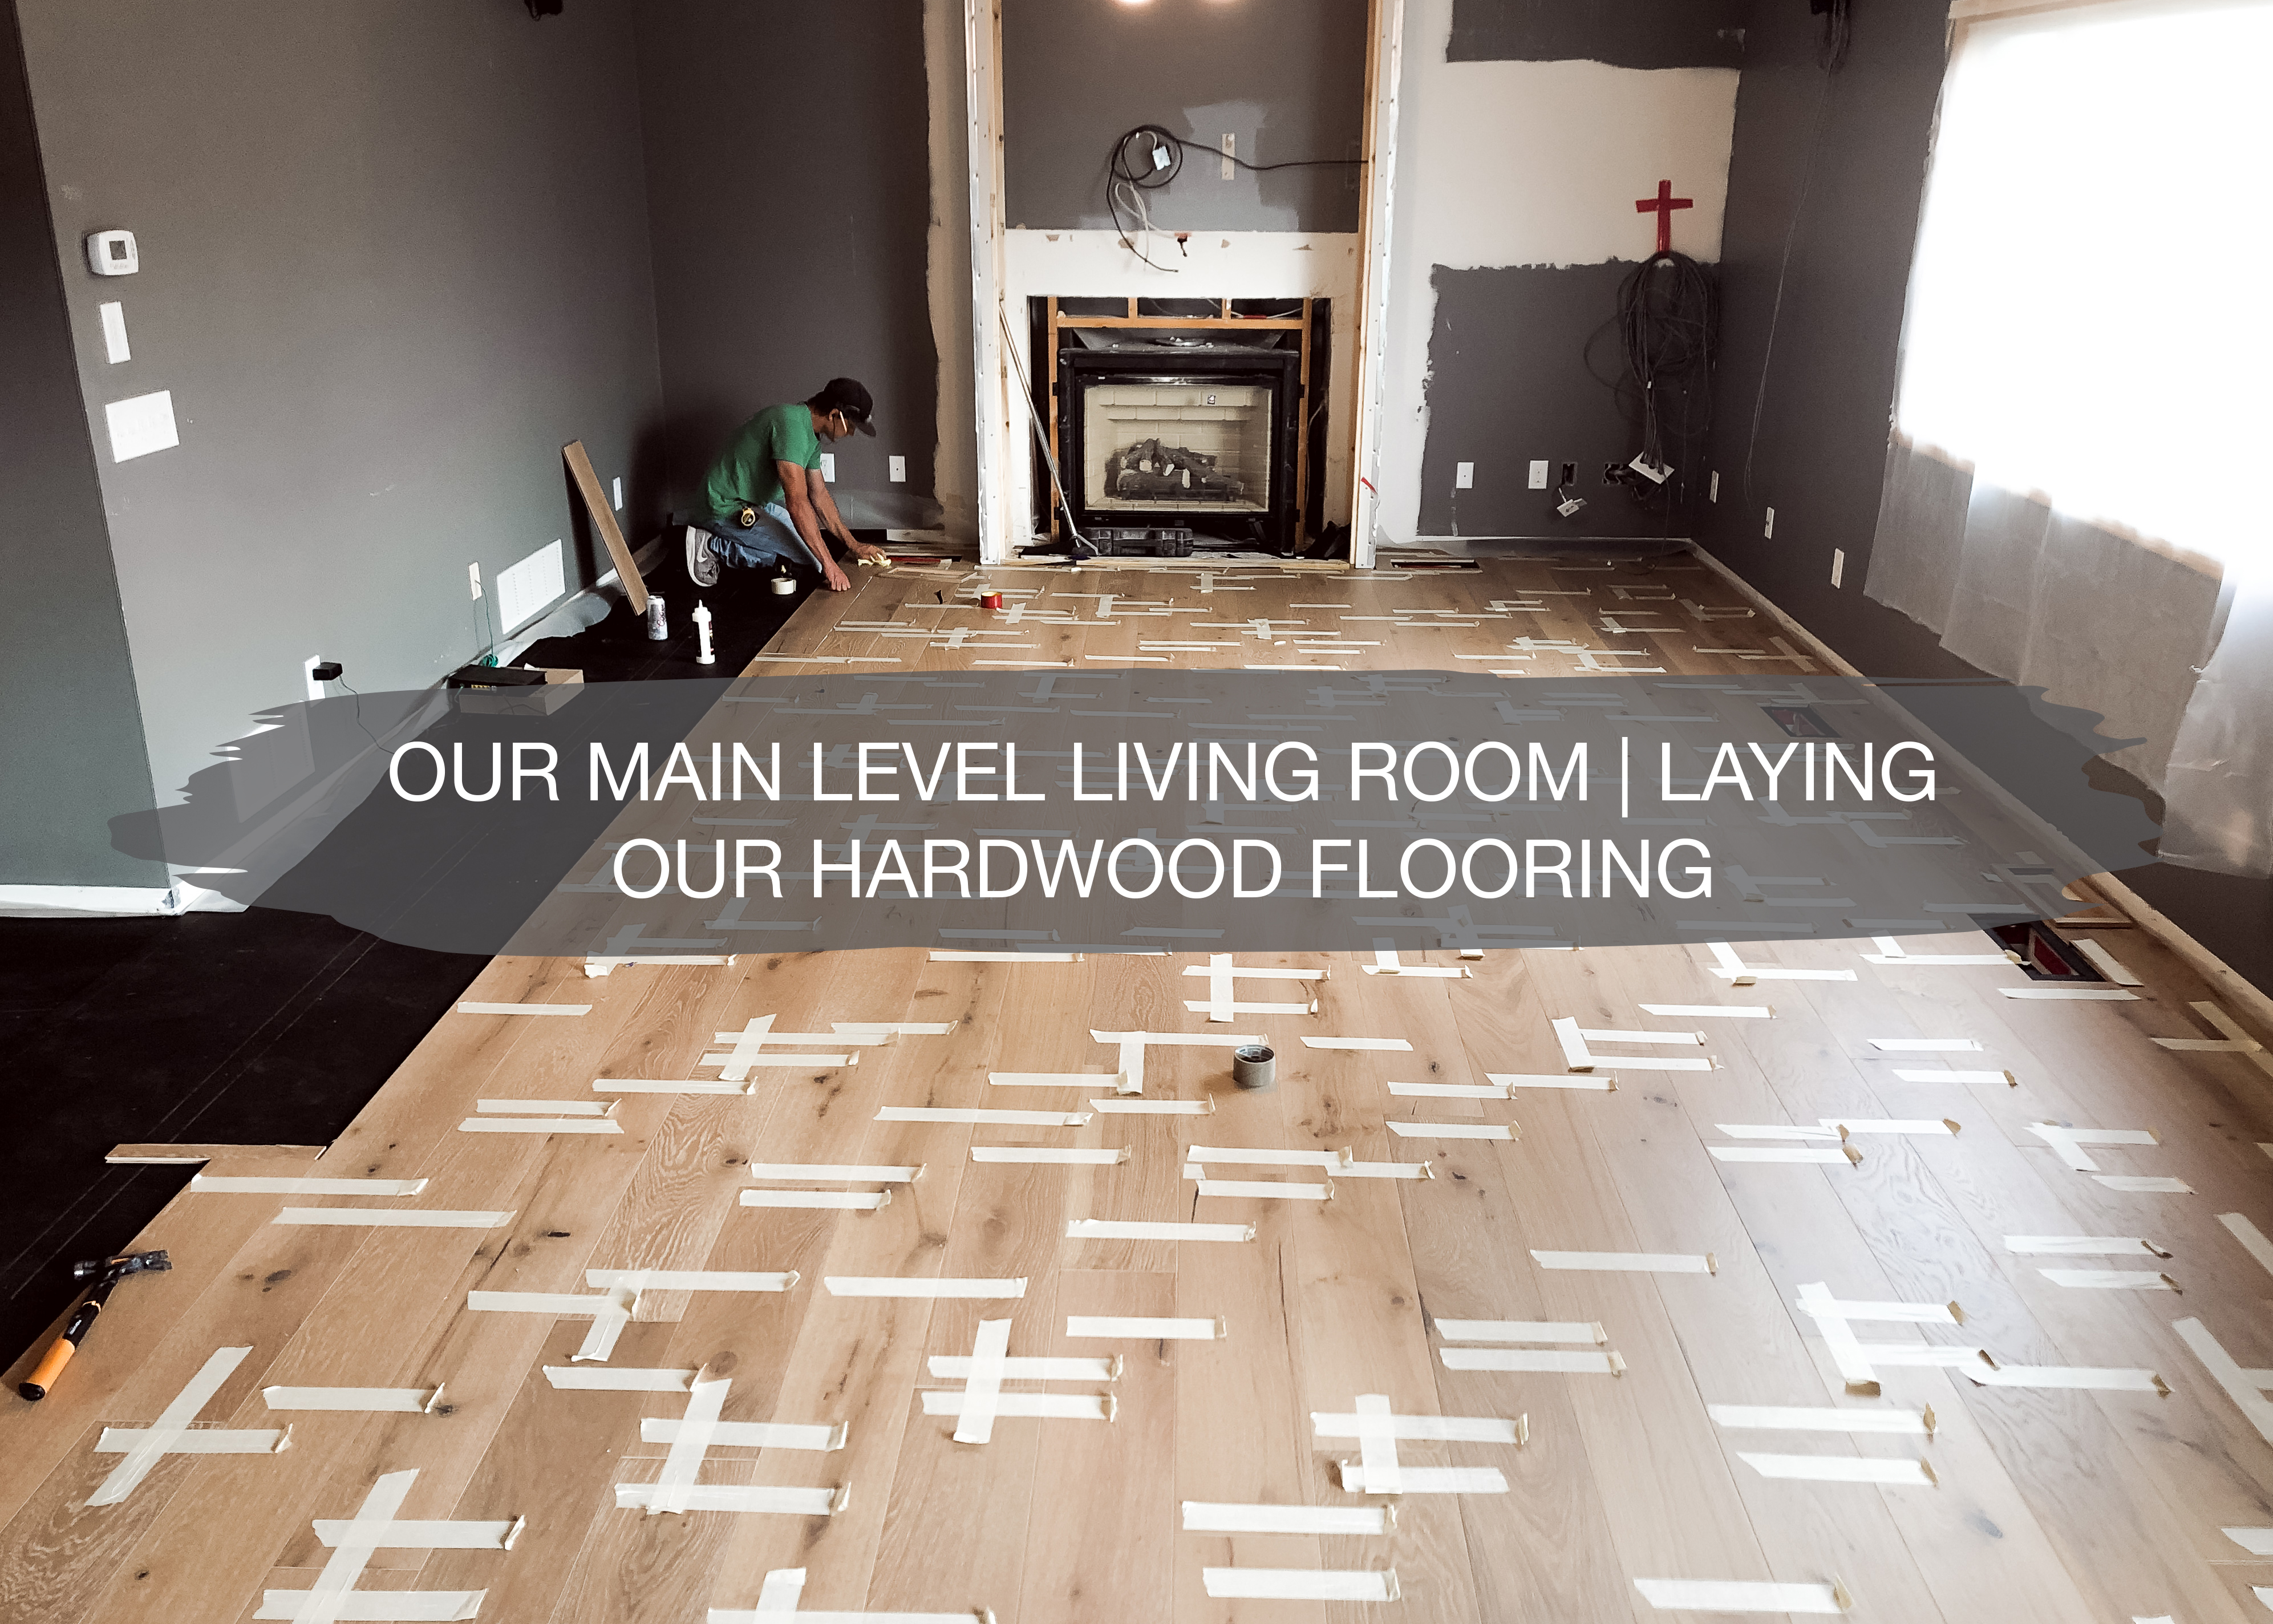 Our Main Level Living Room | Laying our Hardwood Flooring 2